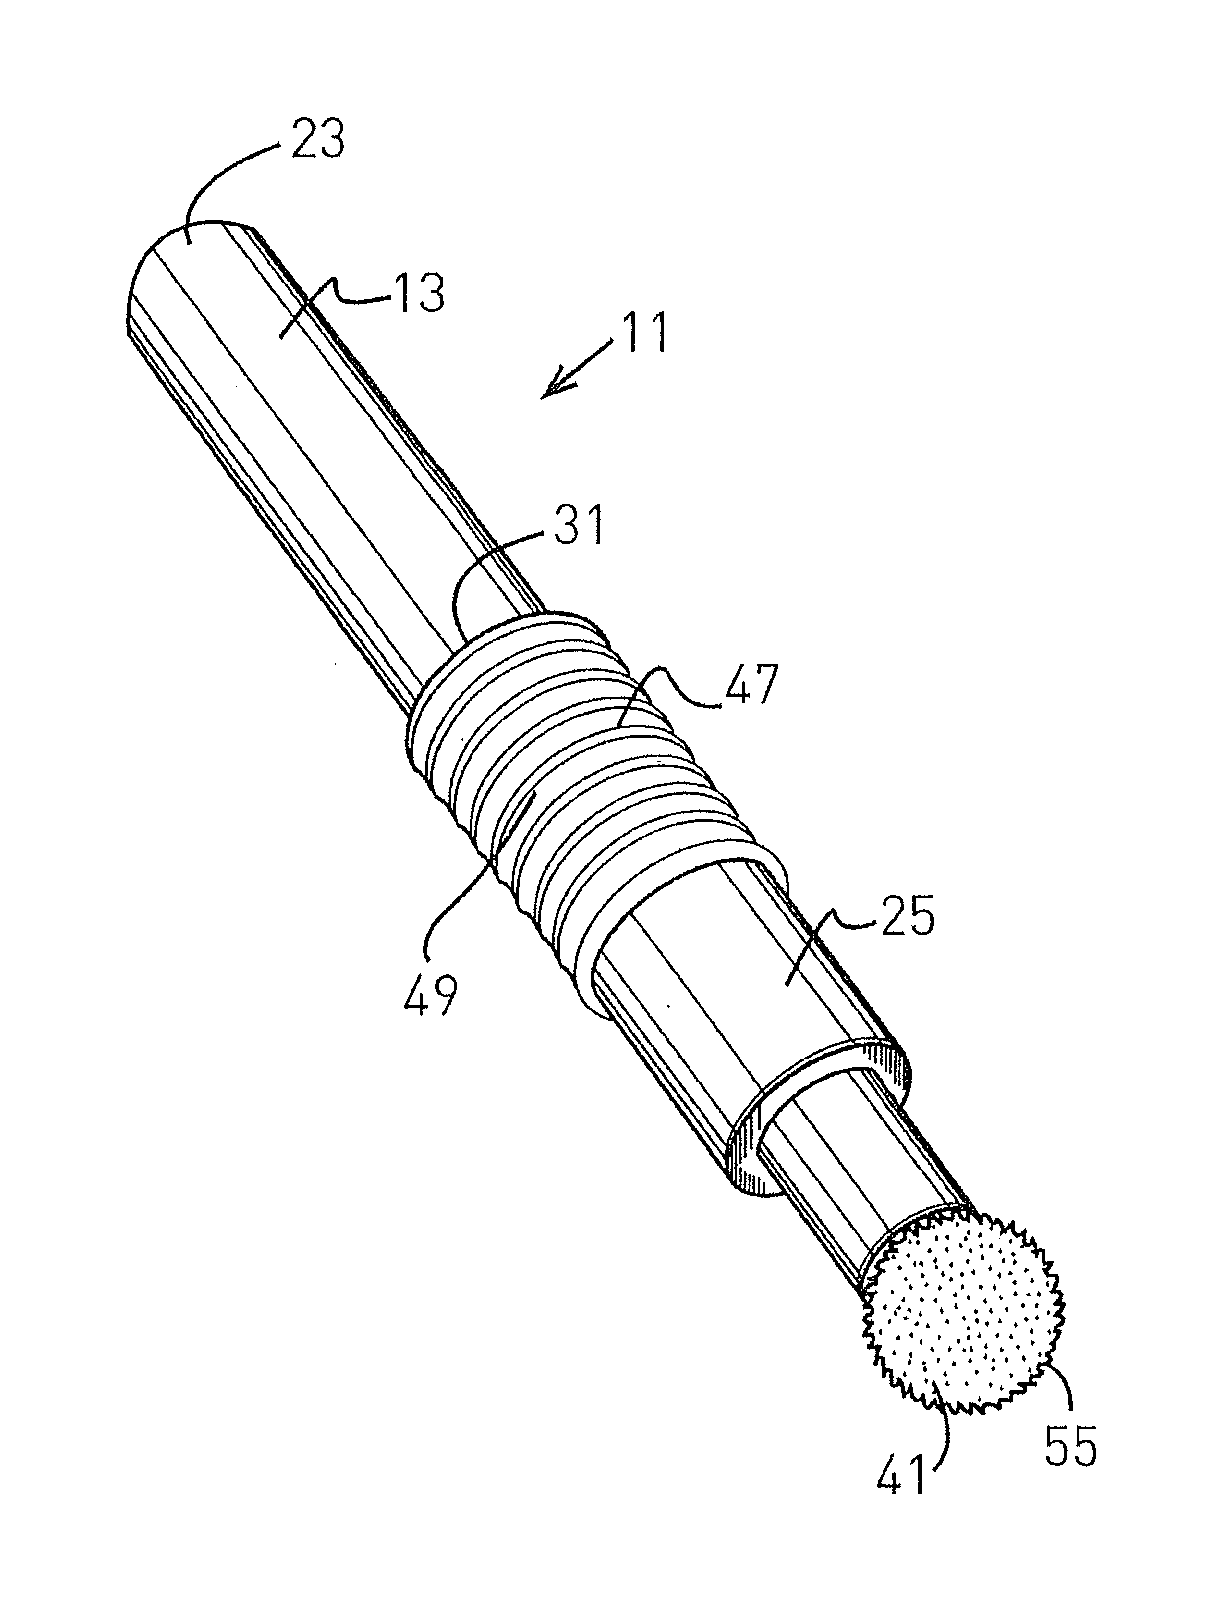 Single and multiple use applicator for volatile fluids having a protective device for guarding against being cut by glass shards formed within the applicator